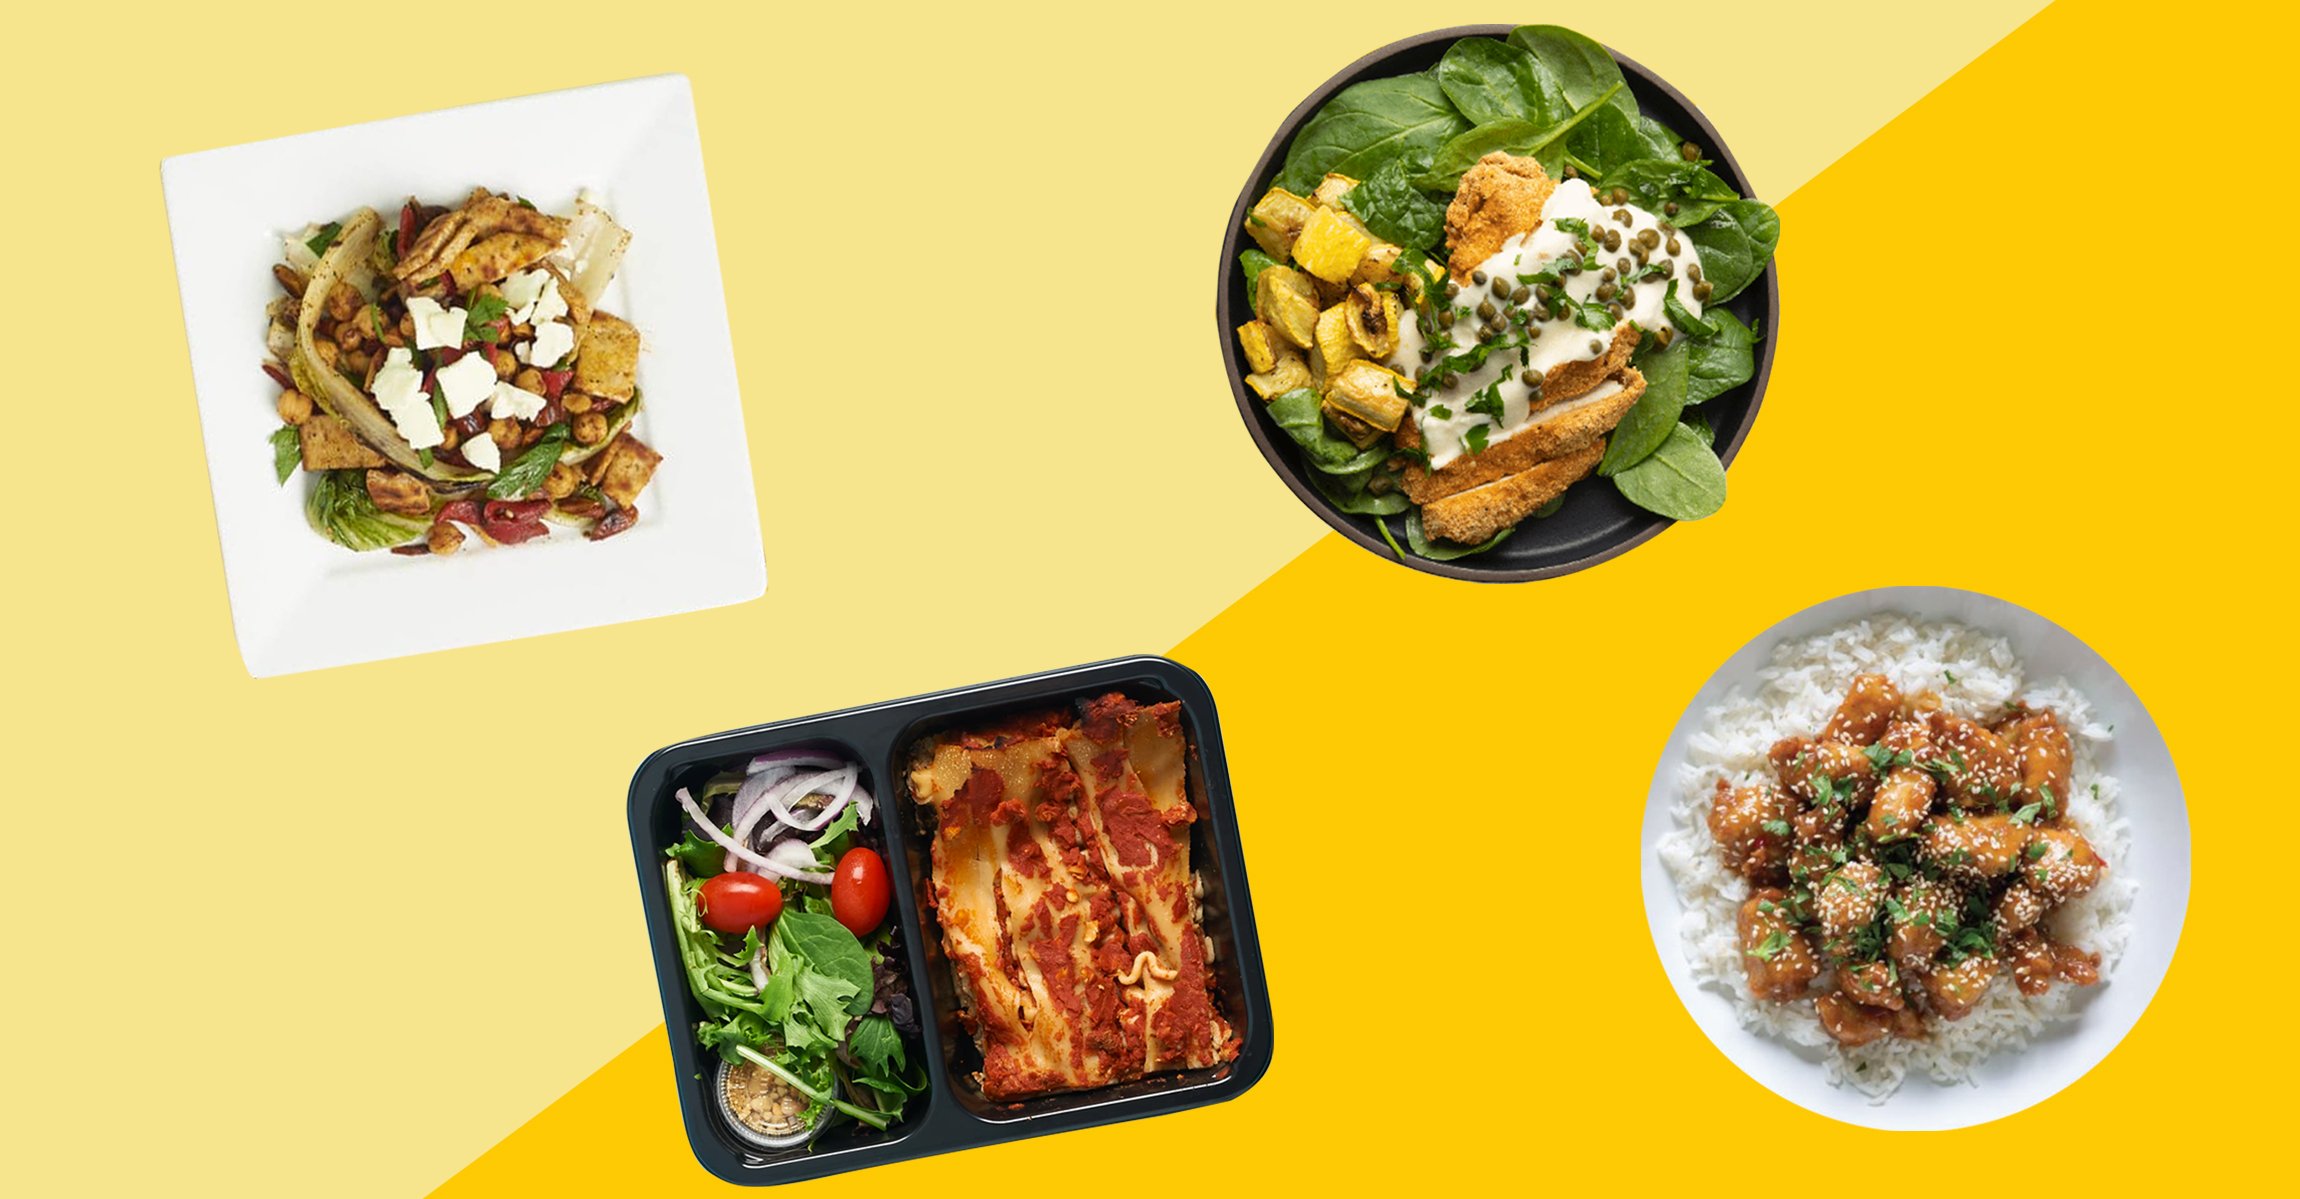 Whole30 Meal Delivery Services: 8 Dietitian-Recommended Options